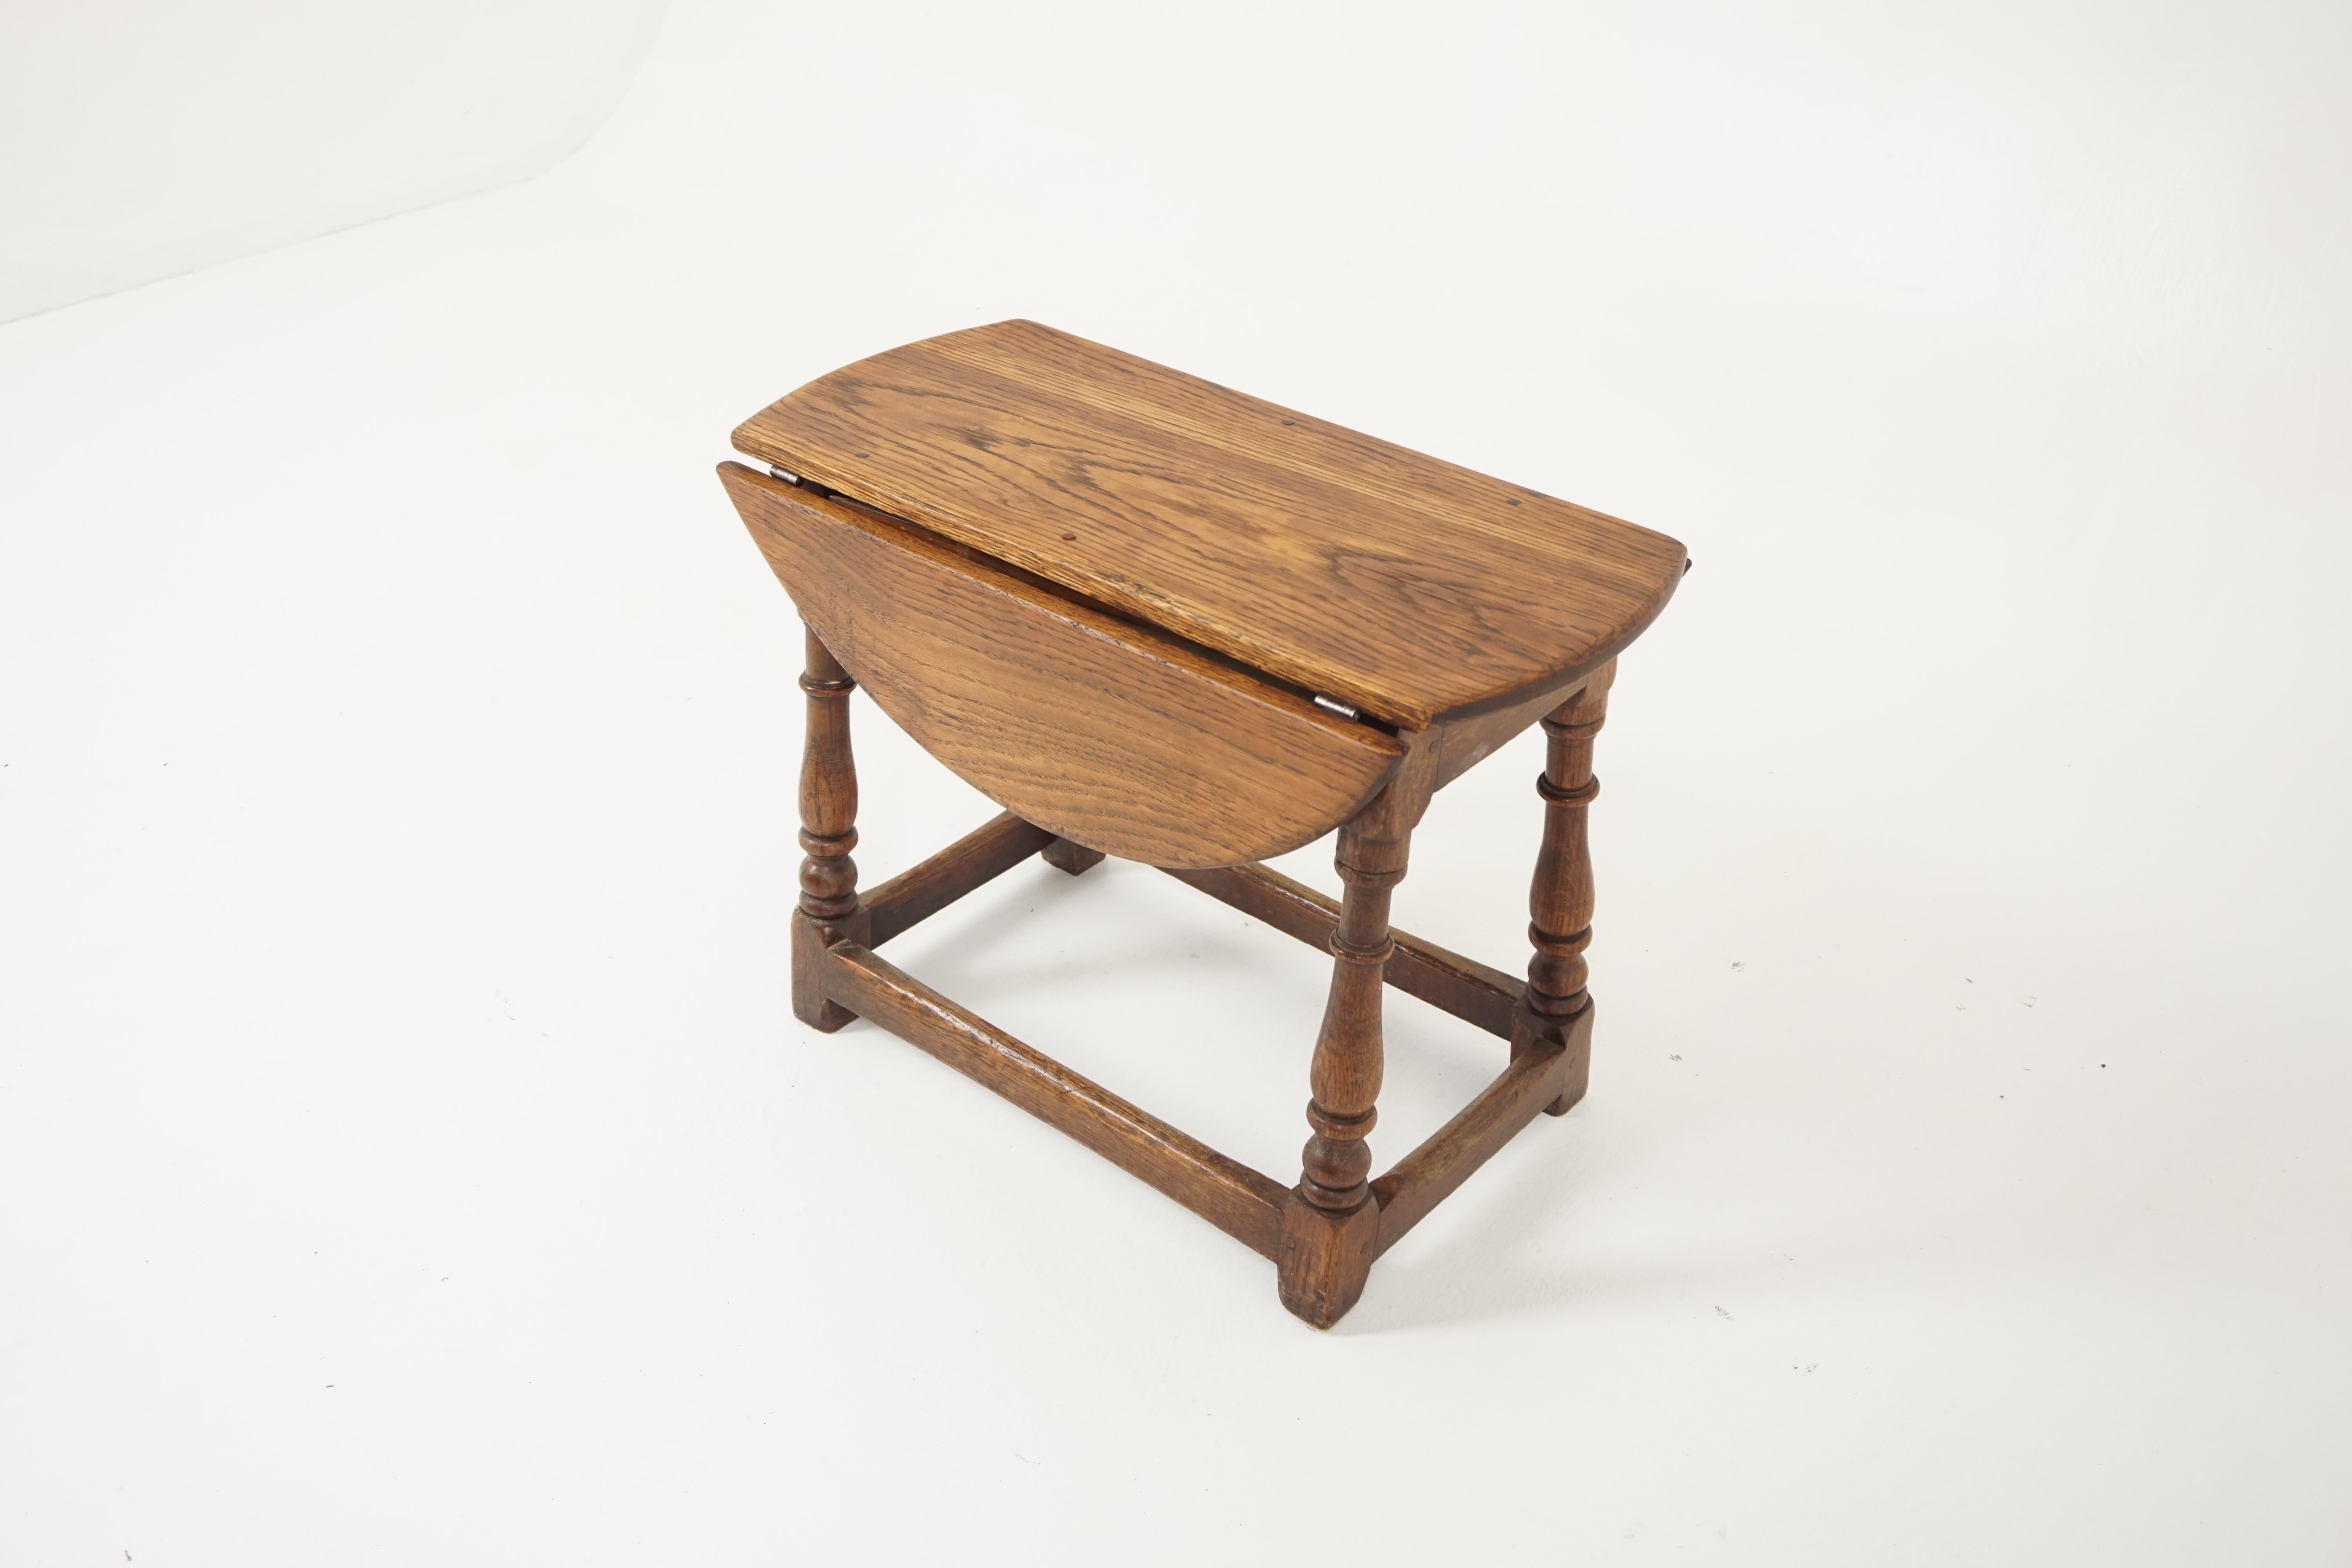 Antique oak Petite drop-leaf table, Gateleg table, Scotland, 1920, B2003

Scotland 1920
Solid oak
Original finish
Rectangular top
Pair of leaves to the sides
All joined by stretchers
Lovely color
Good condition

B2003

Measures: 22.5